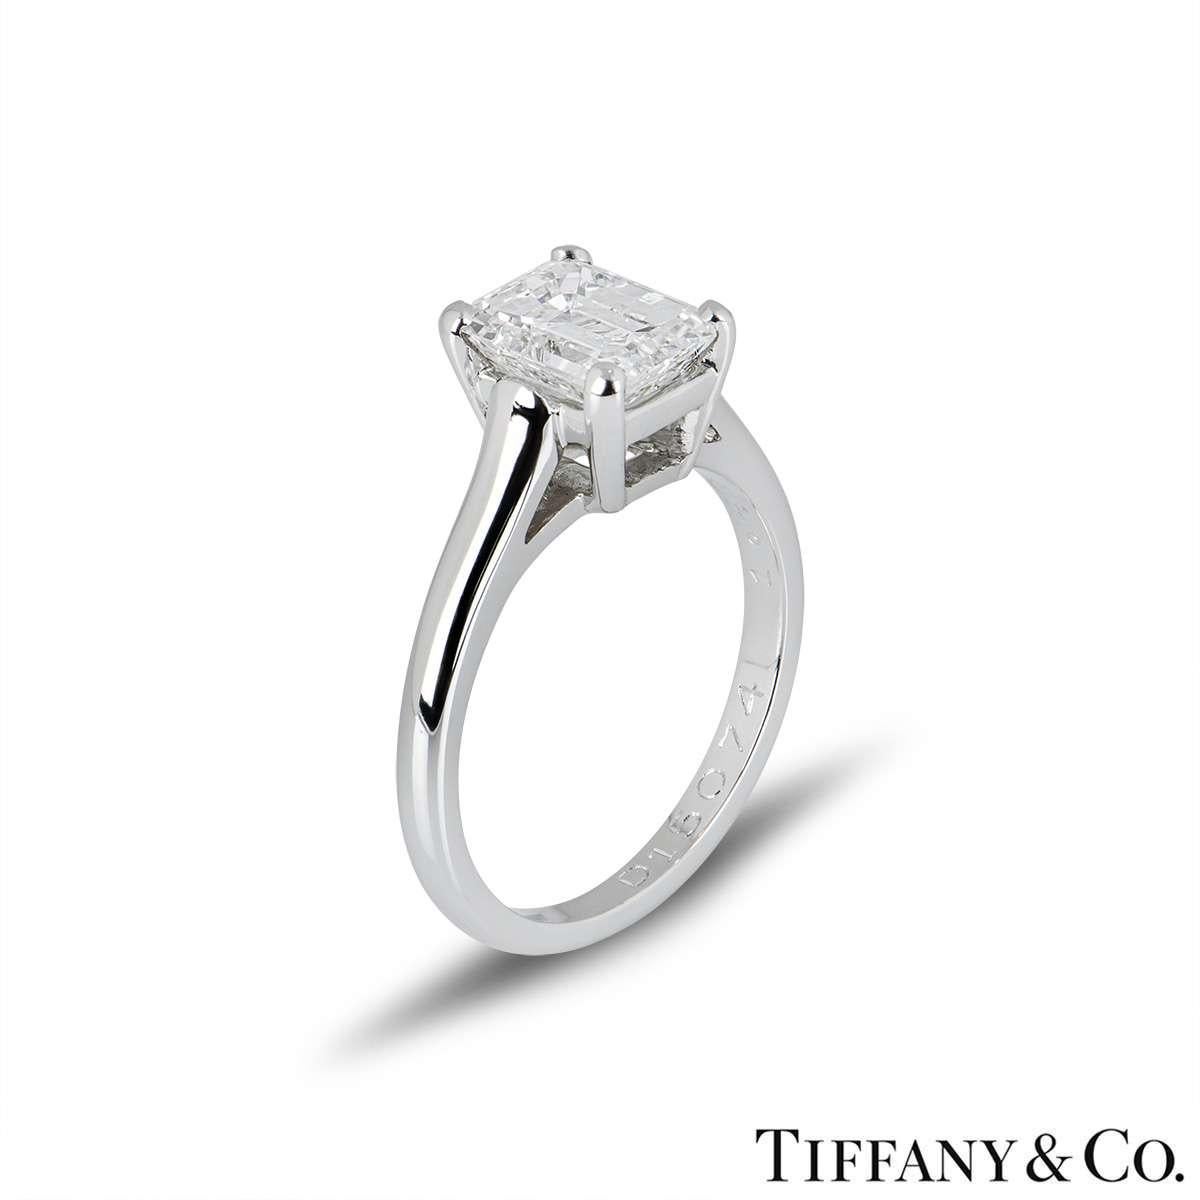 A stunning emerald cut diamond single stone ring in platinum by Tiffany & Co. The ring is set to the centre with a 1.59ct emerald cut diamond, E colour and VS1 in clarity, set within a four claw setting. The ring is currently a size UK J½ - EU 49 -